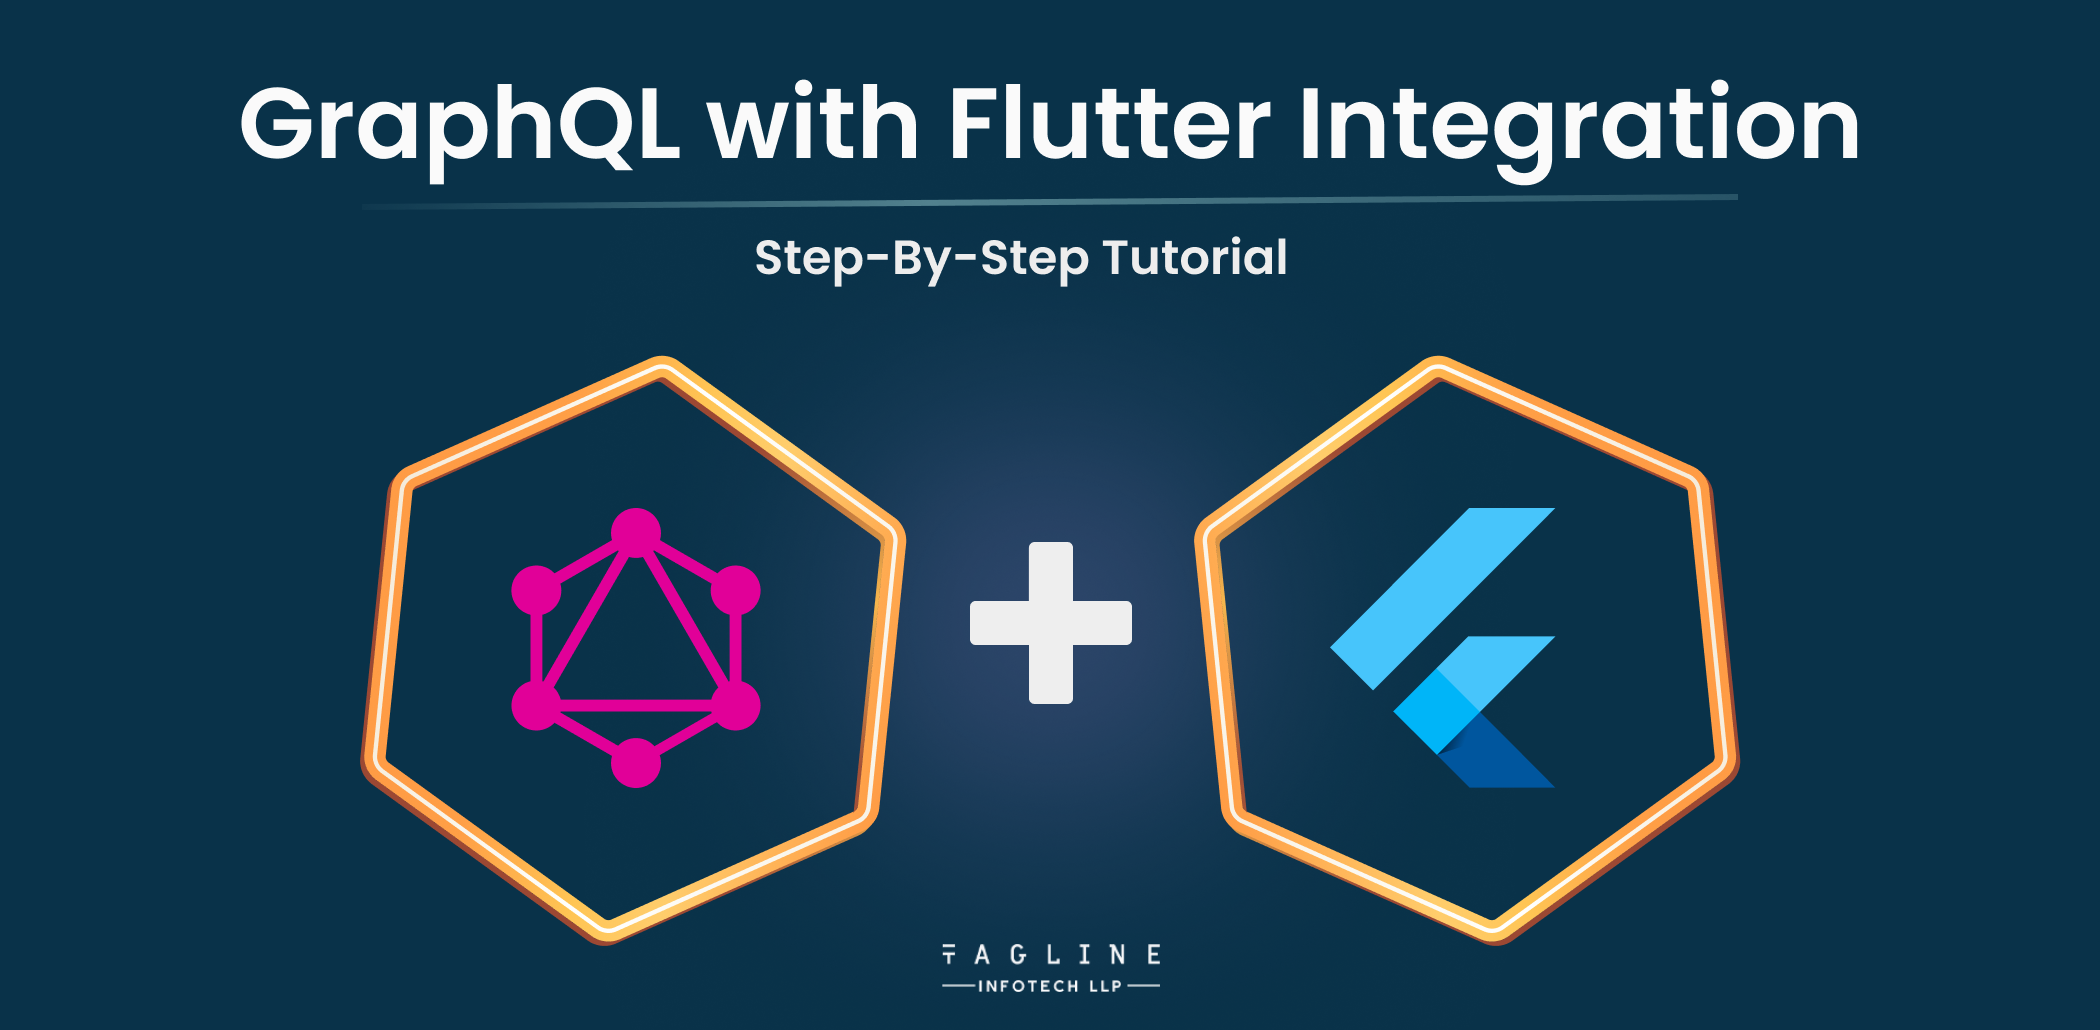 GraphQL with Flutter Integration: Step-by-Step Tutorial